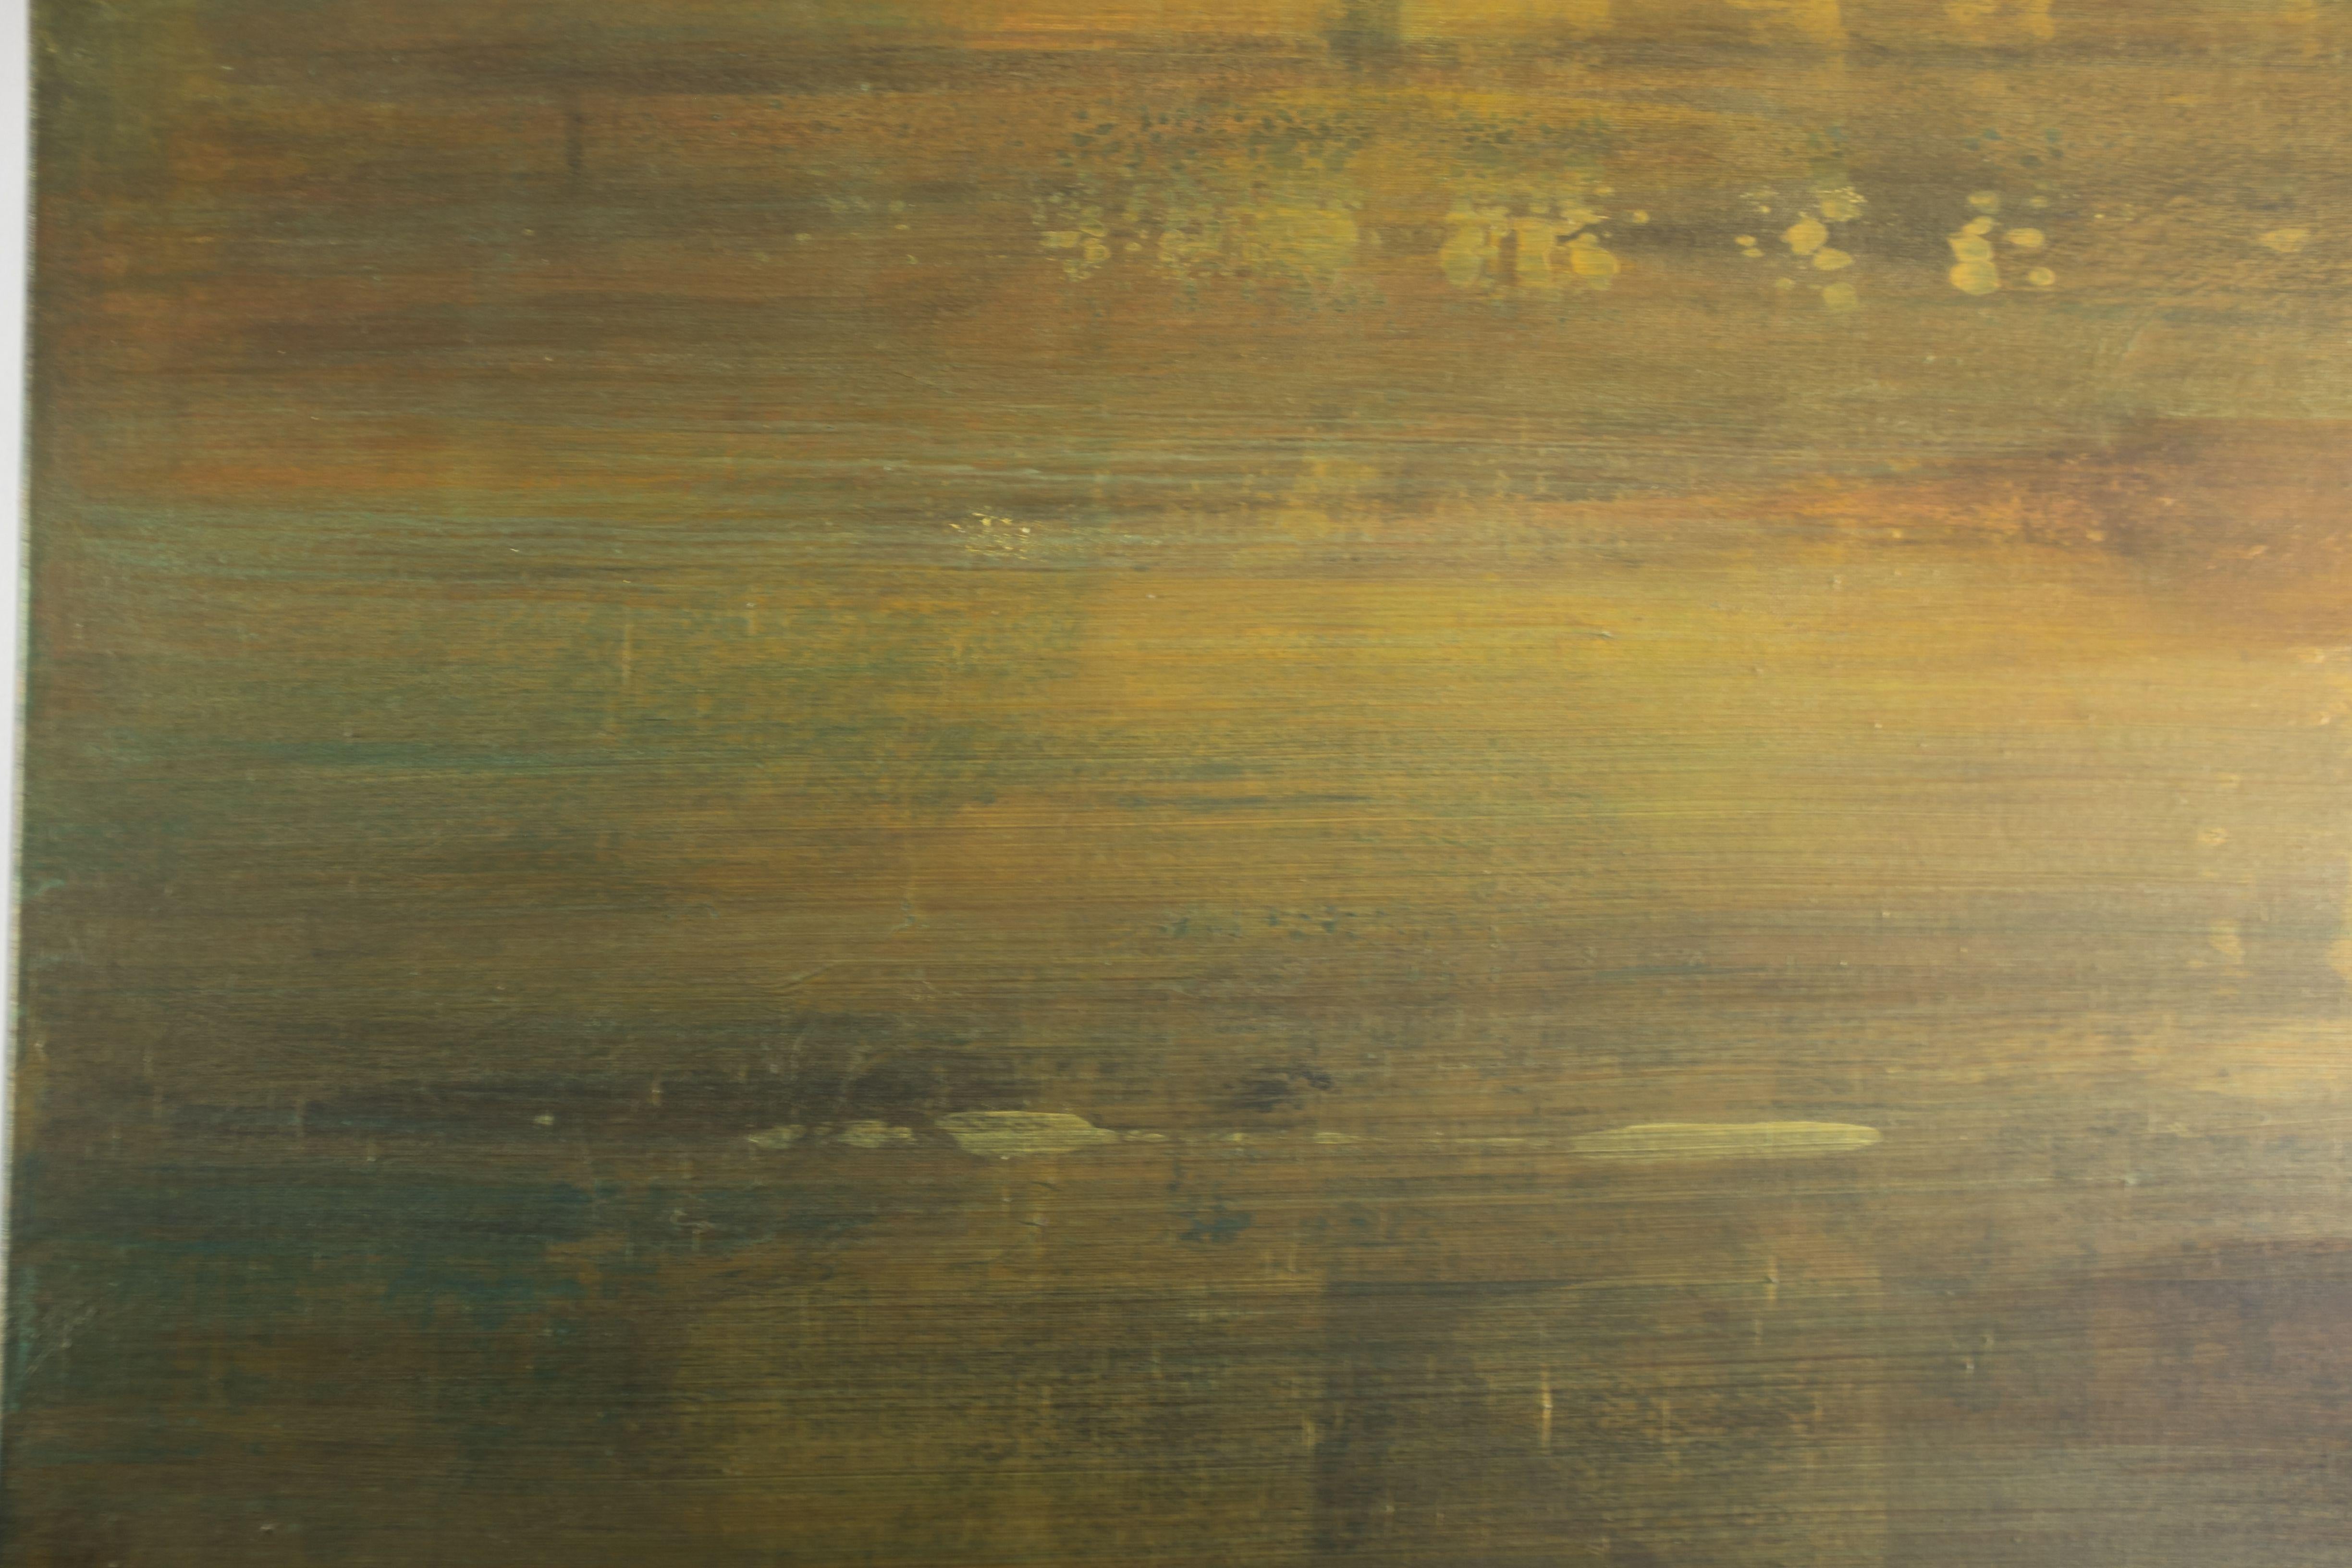 Western Shore, Painting, Acrylic on Canvas - Brown Abstract Painting by Peter Corriston